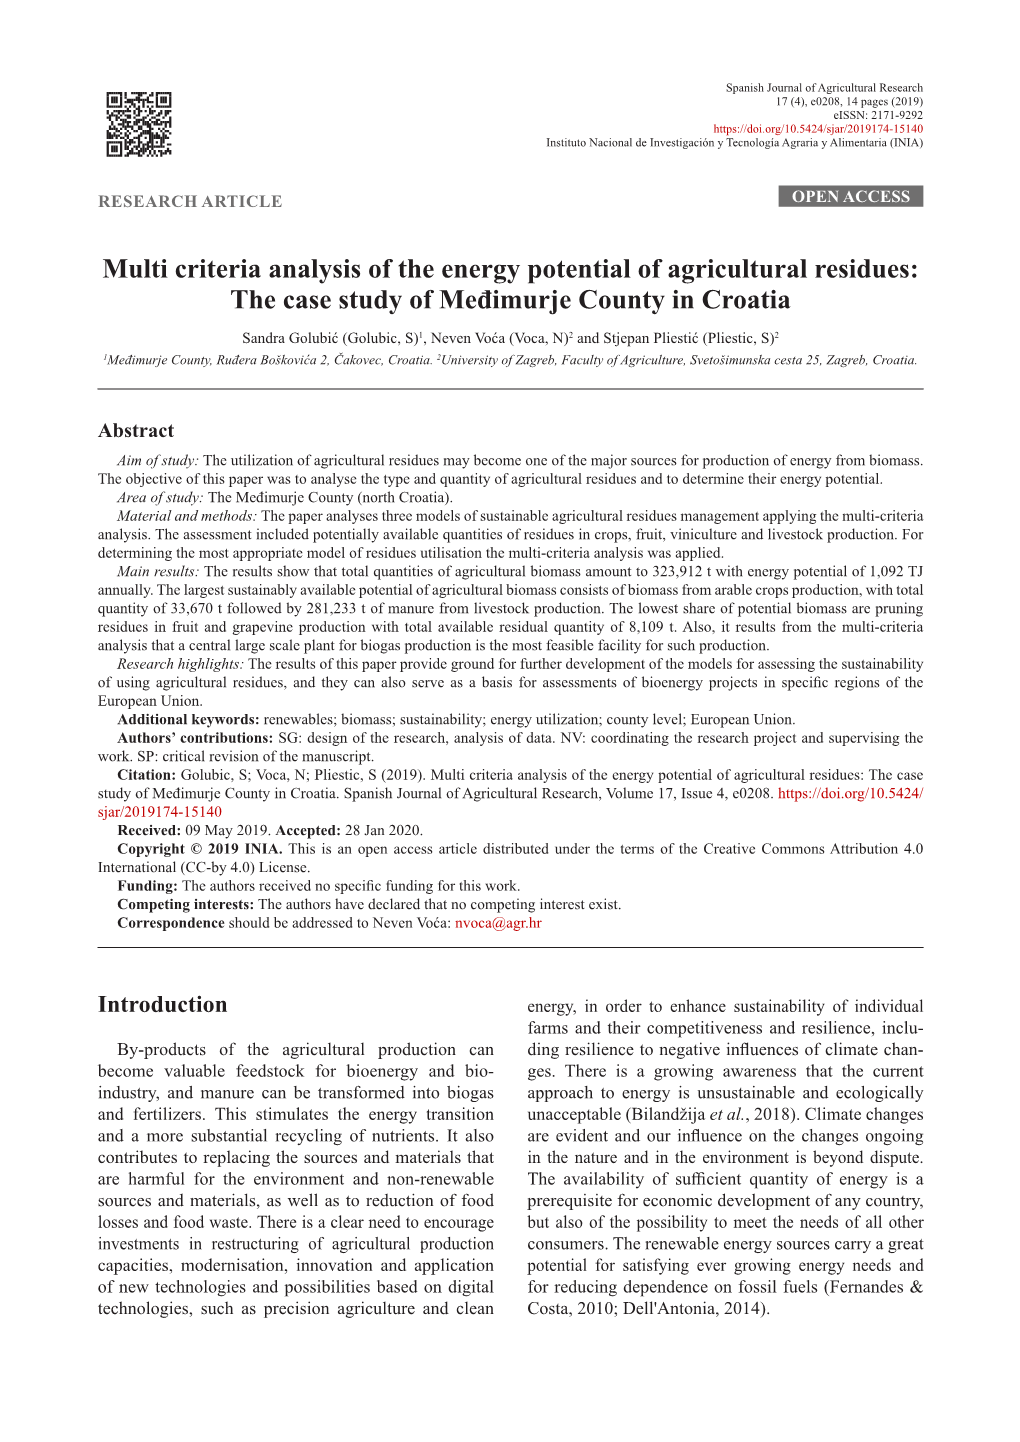 Multi Criteria Analysis of the Energy Potential of Agricultural Residues